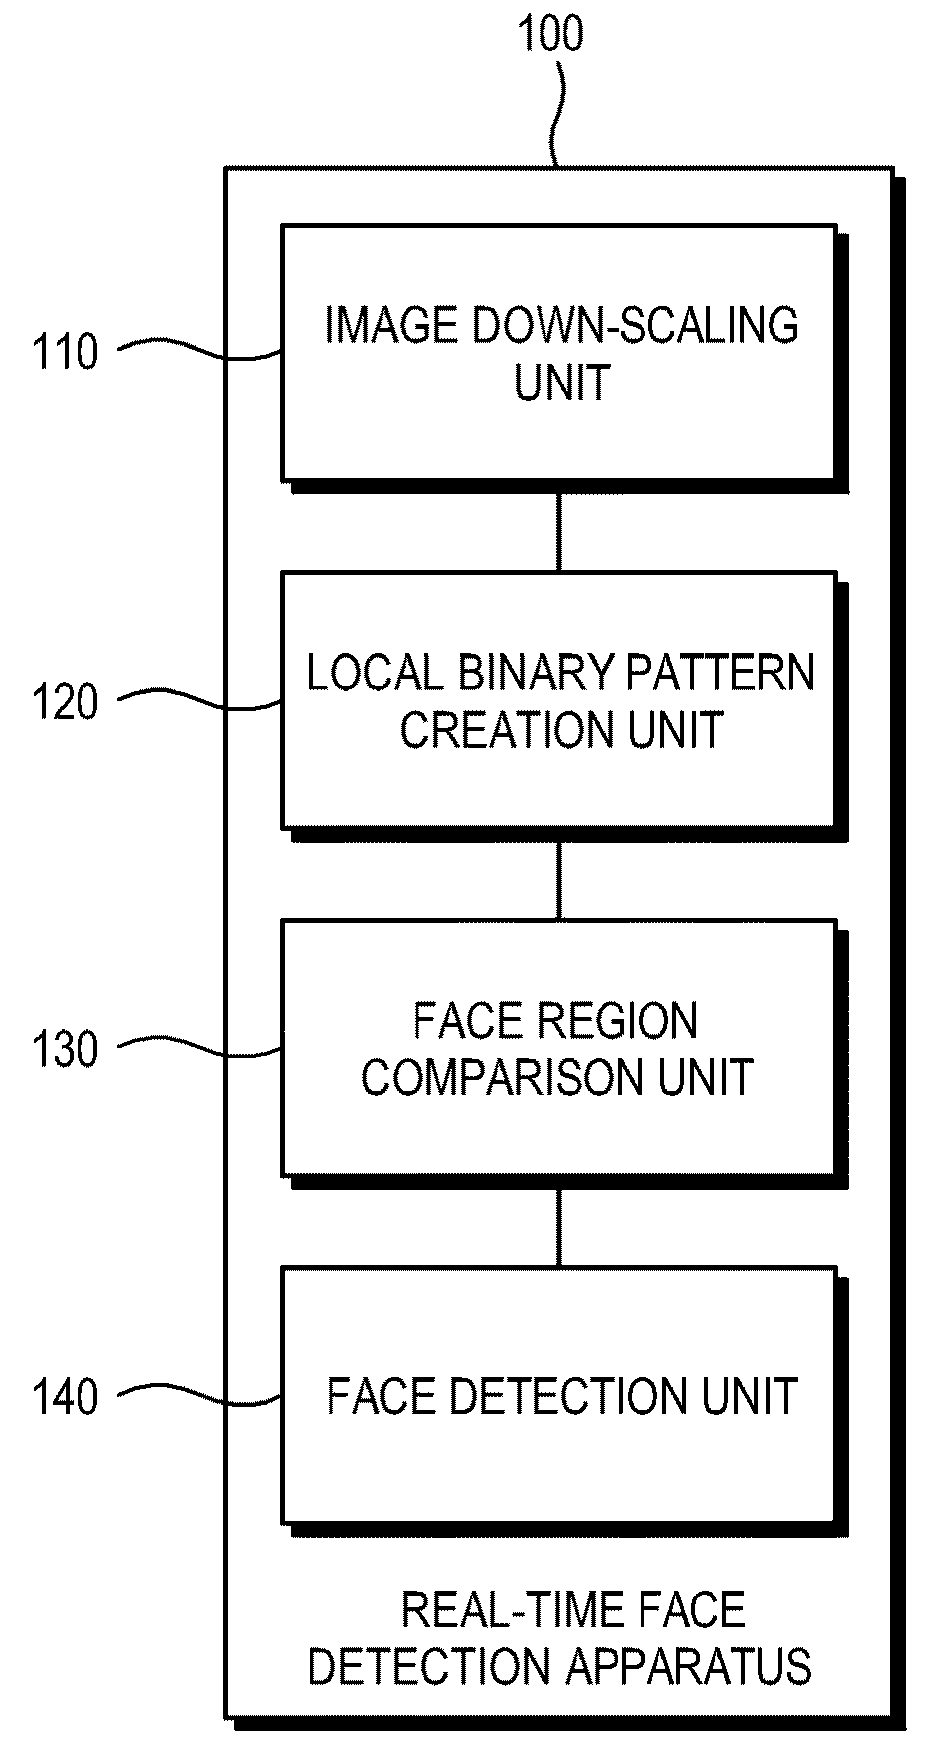 Real-time face detection apparatus